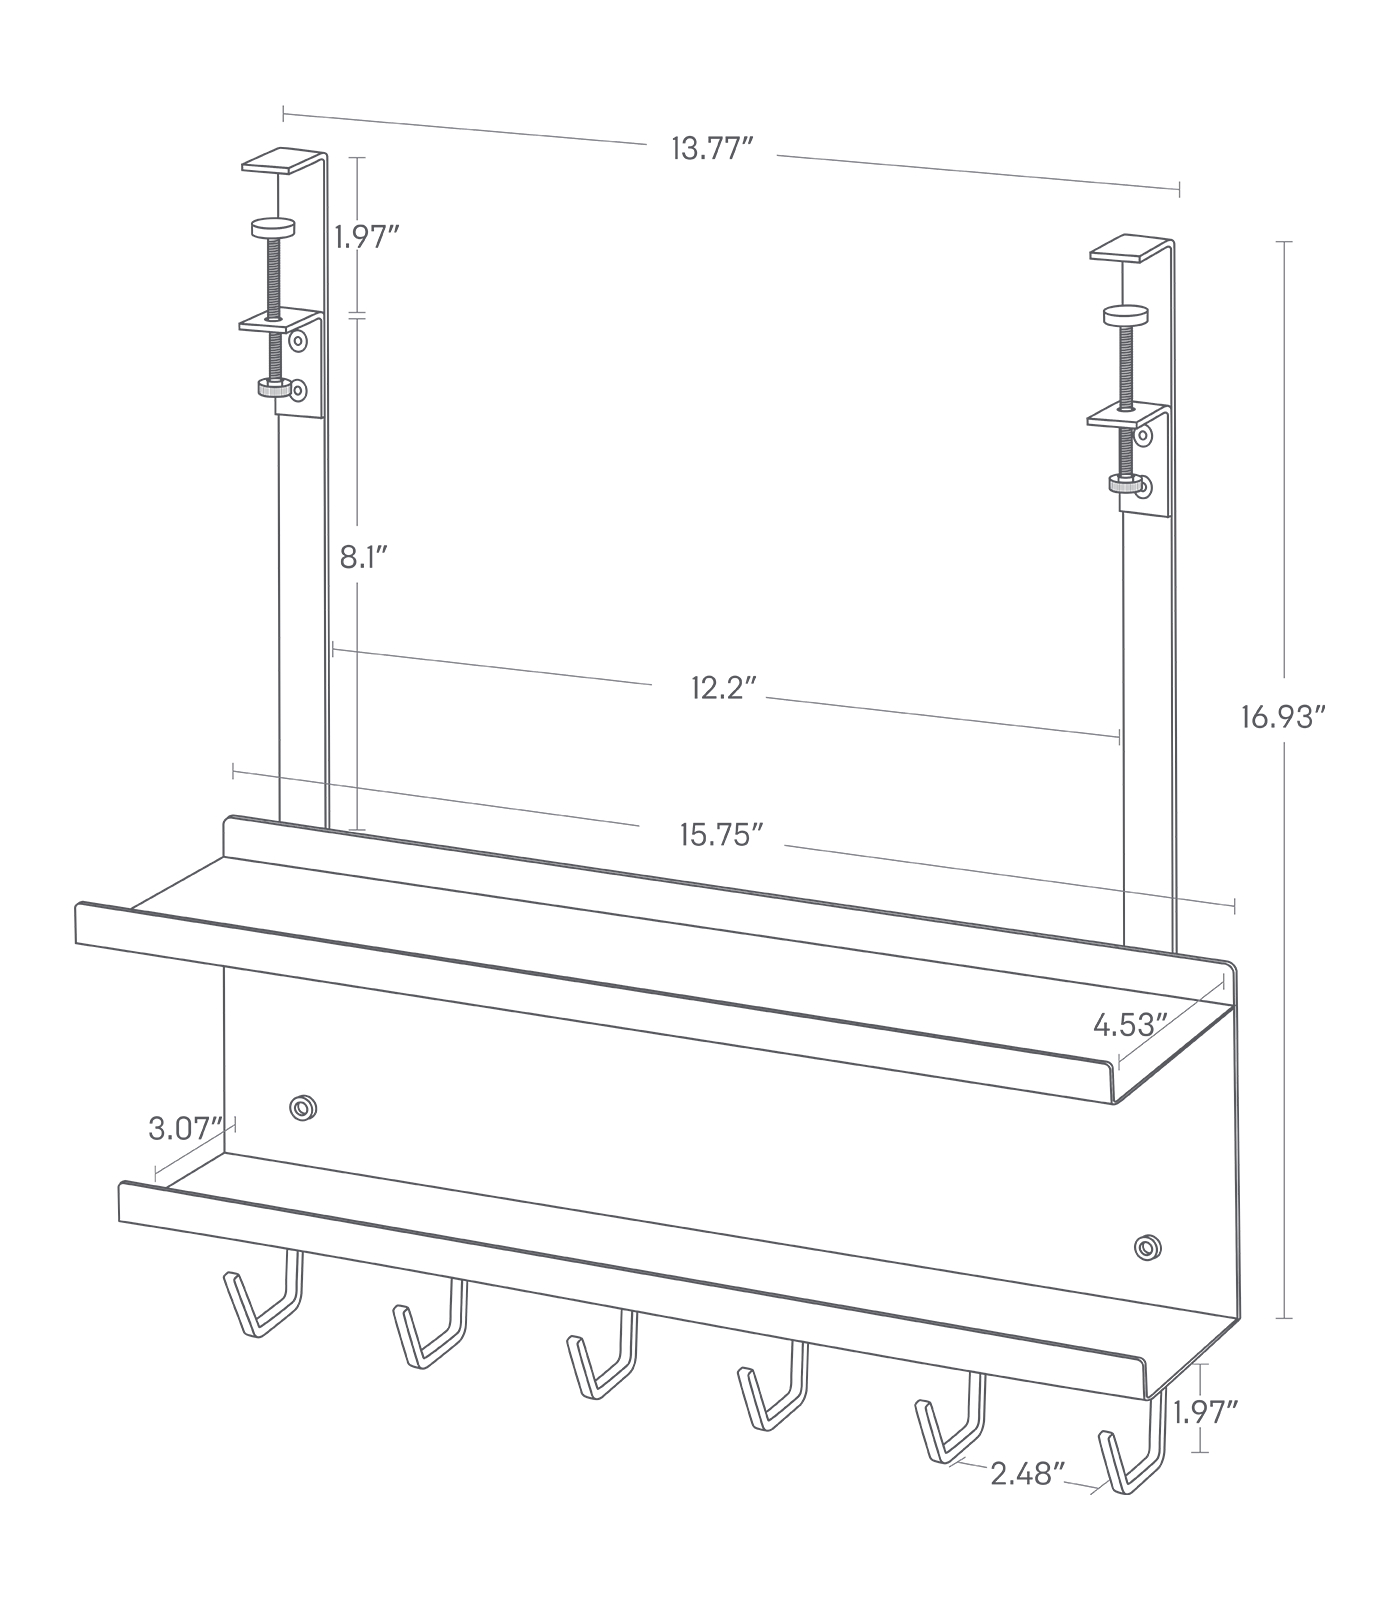 Dimension image for Under-Desk Cable & Router Storage Rack on a white background including dimensions  L 4.53 x W 15.75 x H 16.93 inches